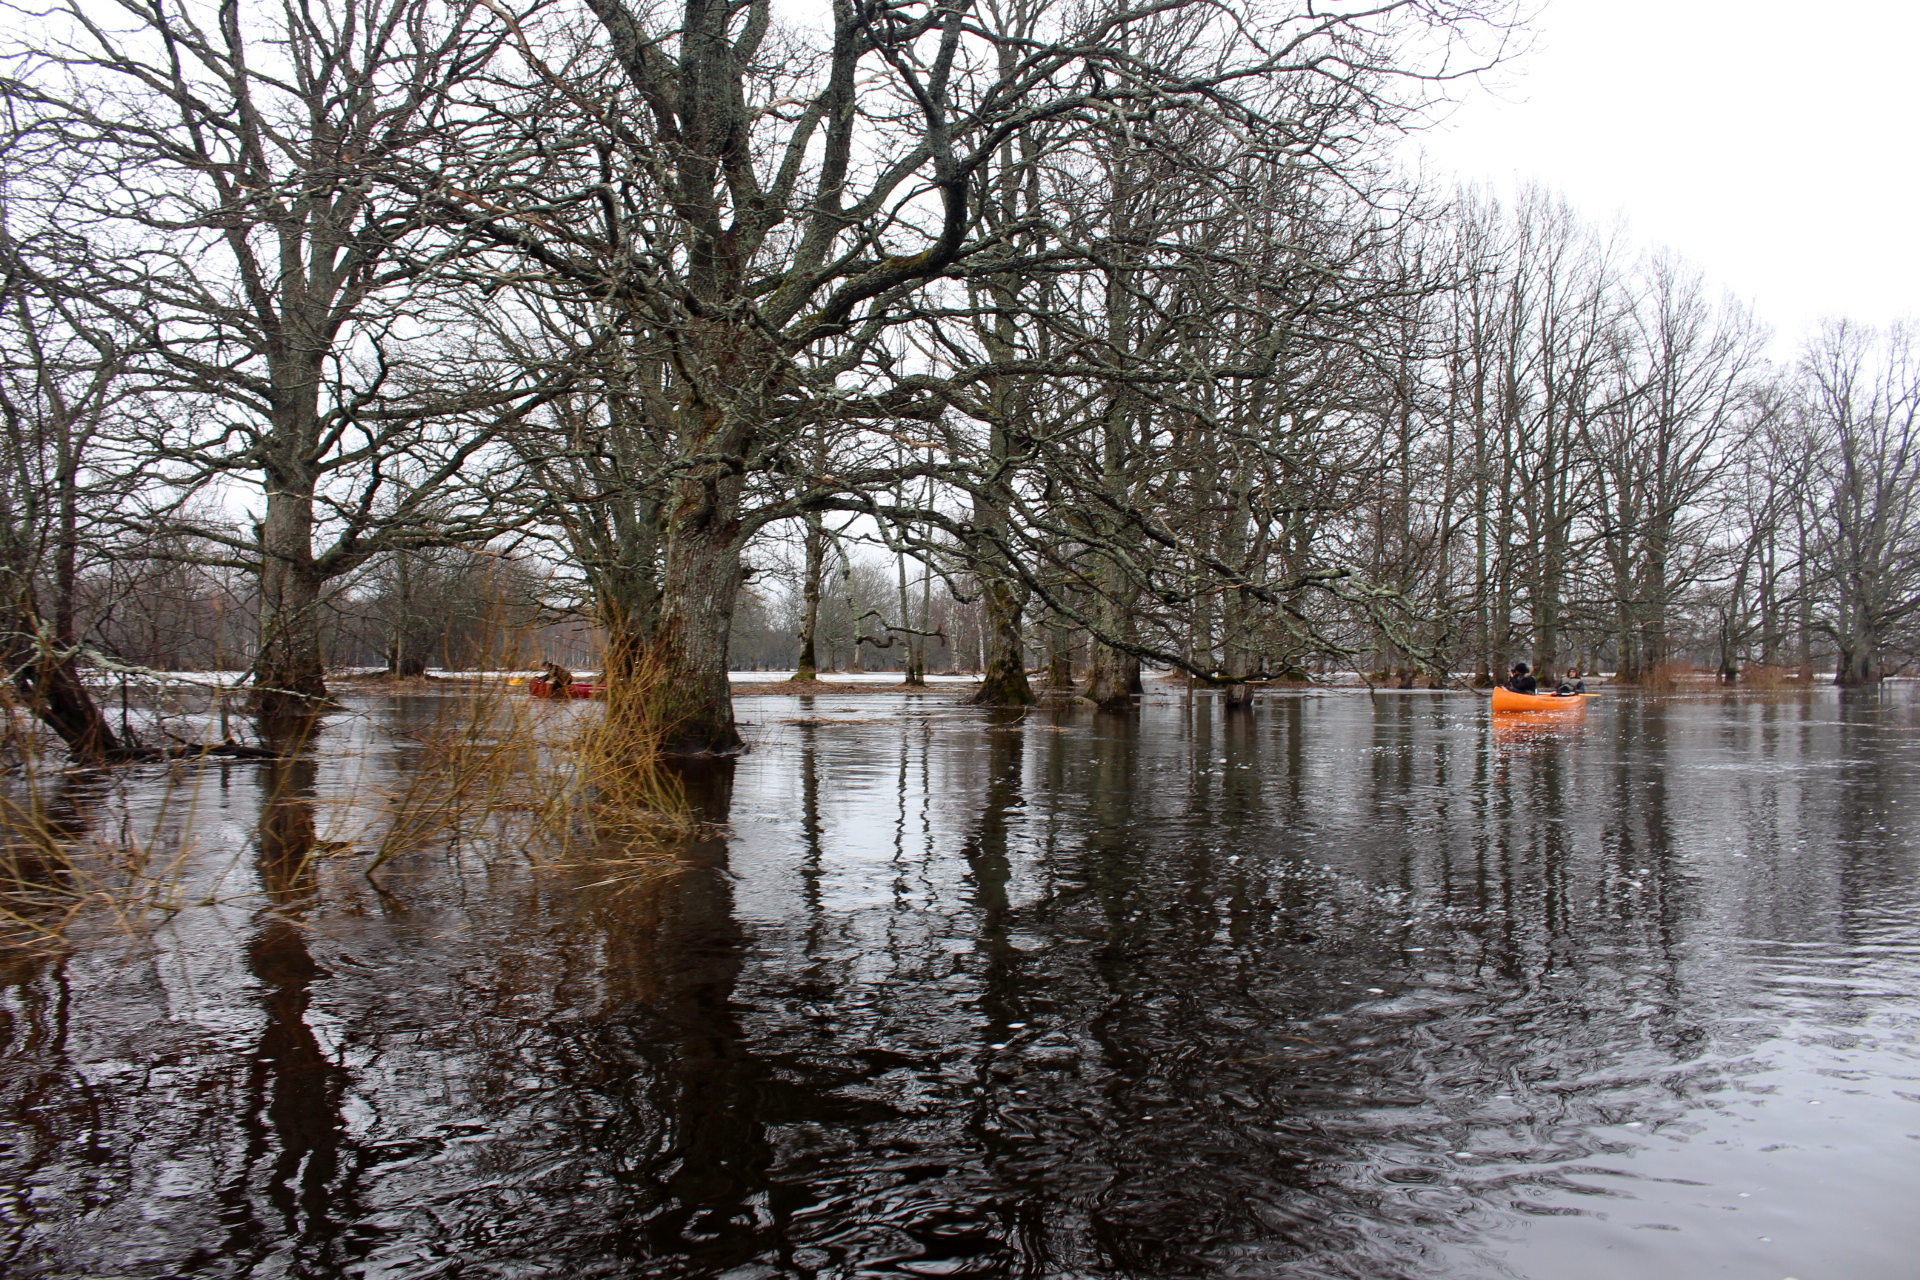 trees line a flooded field, with orange buoys floating in the water